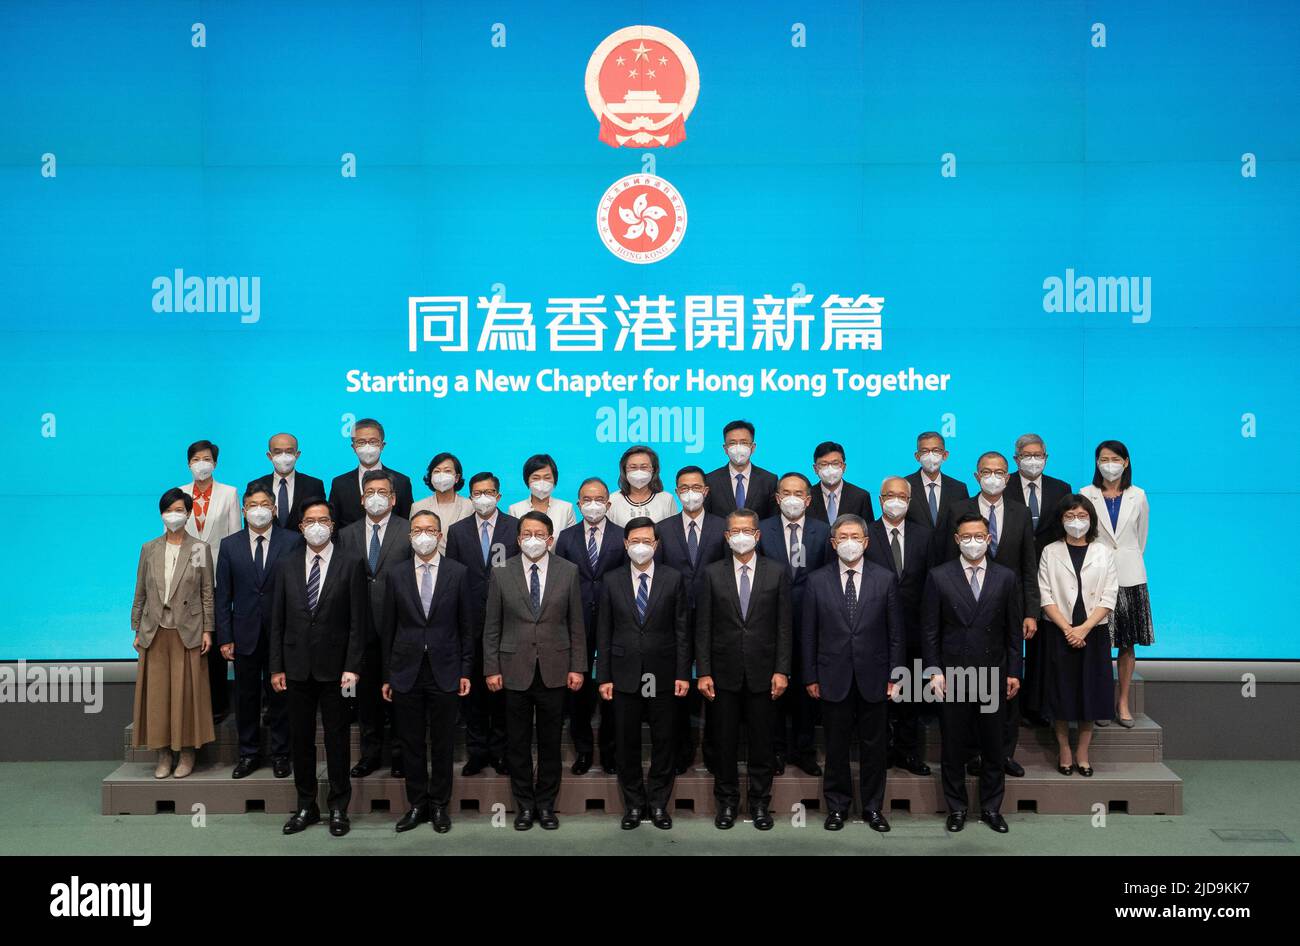 Hong Kong, June 19. 1st July, 2022. John Lee, the incoming chief executive of the Hong Kong Special Administrative Region (HKSAR), and principal officials of the sixth-term HKSAR government, pose for a group photo during a press conference in South China's Hong Kong, June 19, 2022. China's State Council on Sunday appointed principal officials of the sixth-term government of the HKSAR based on the nominations put forward by the incoming HKSAR chief executive John Lee. The officials will assume office on July 1, 2022. Credit: Lui Siu Wai/Xinhua/Alamy Live News Stock Photo